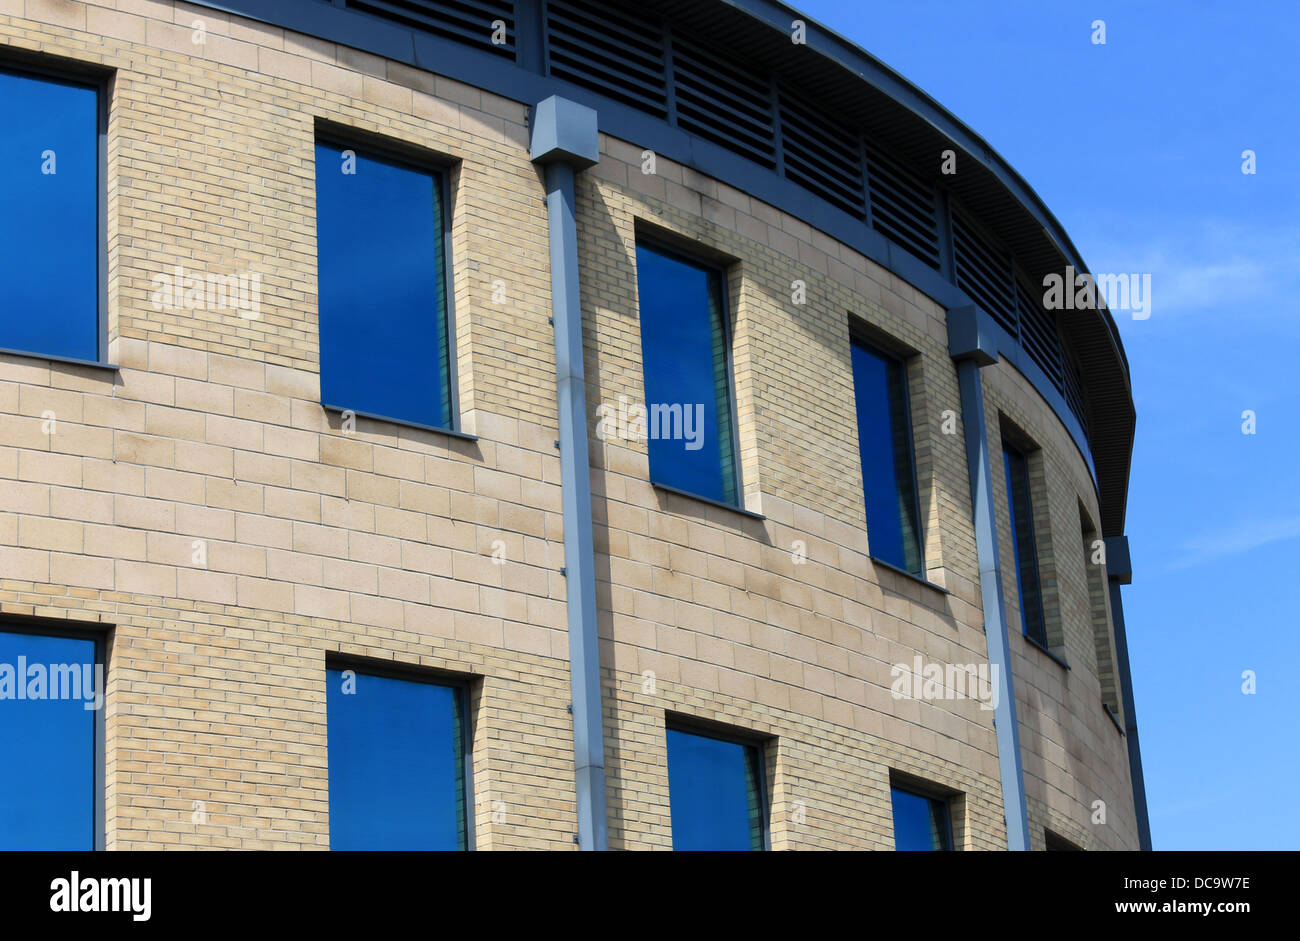 Exterior of curved modern office building with blue windows. Stock Photo